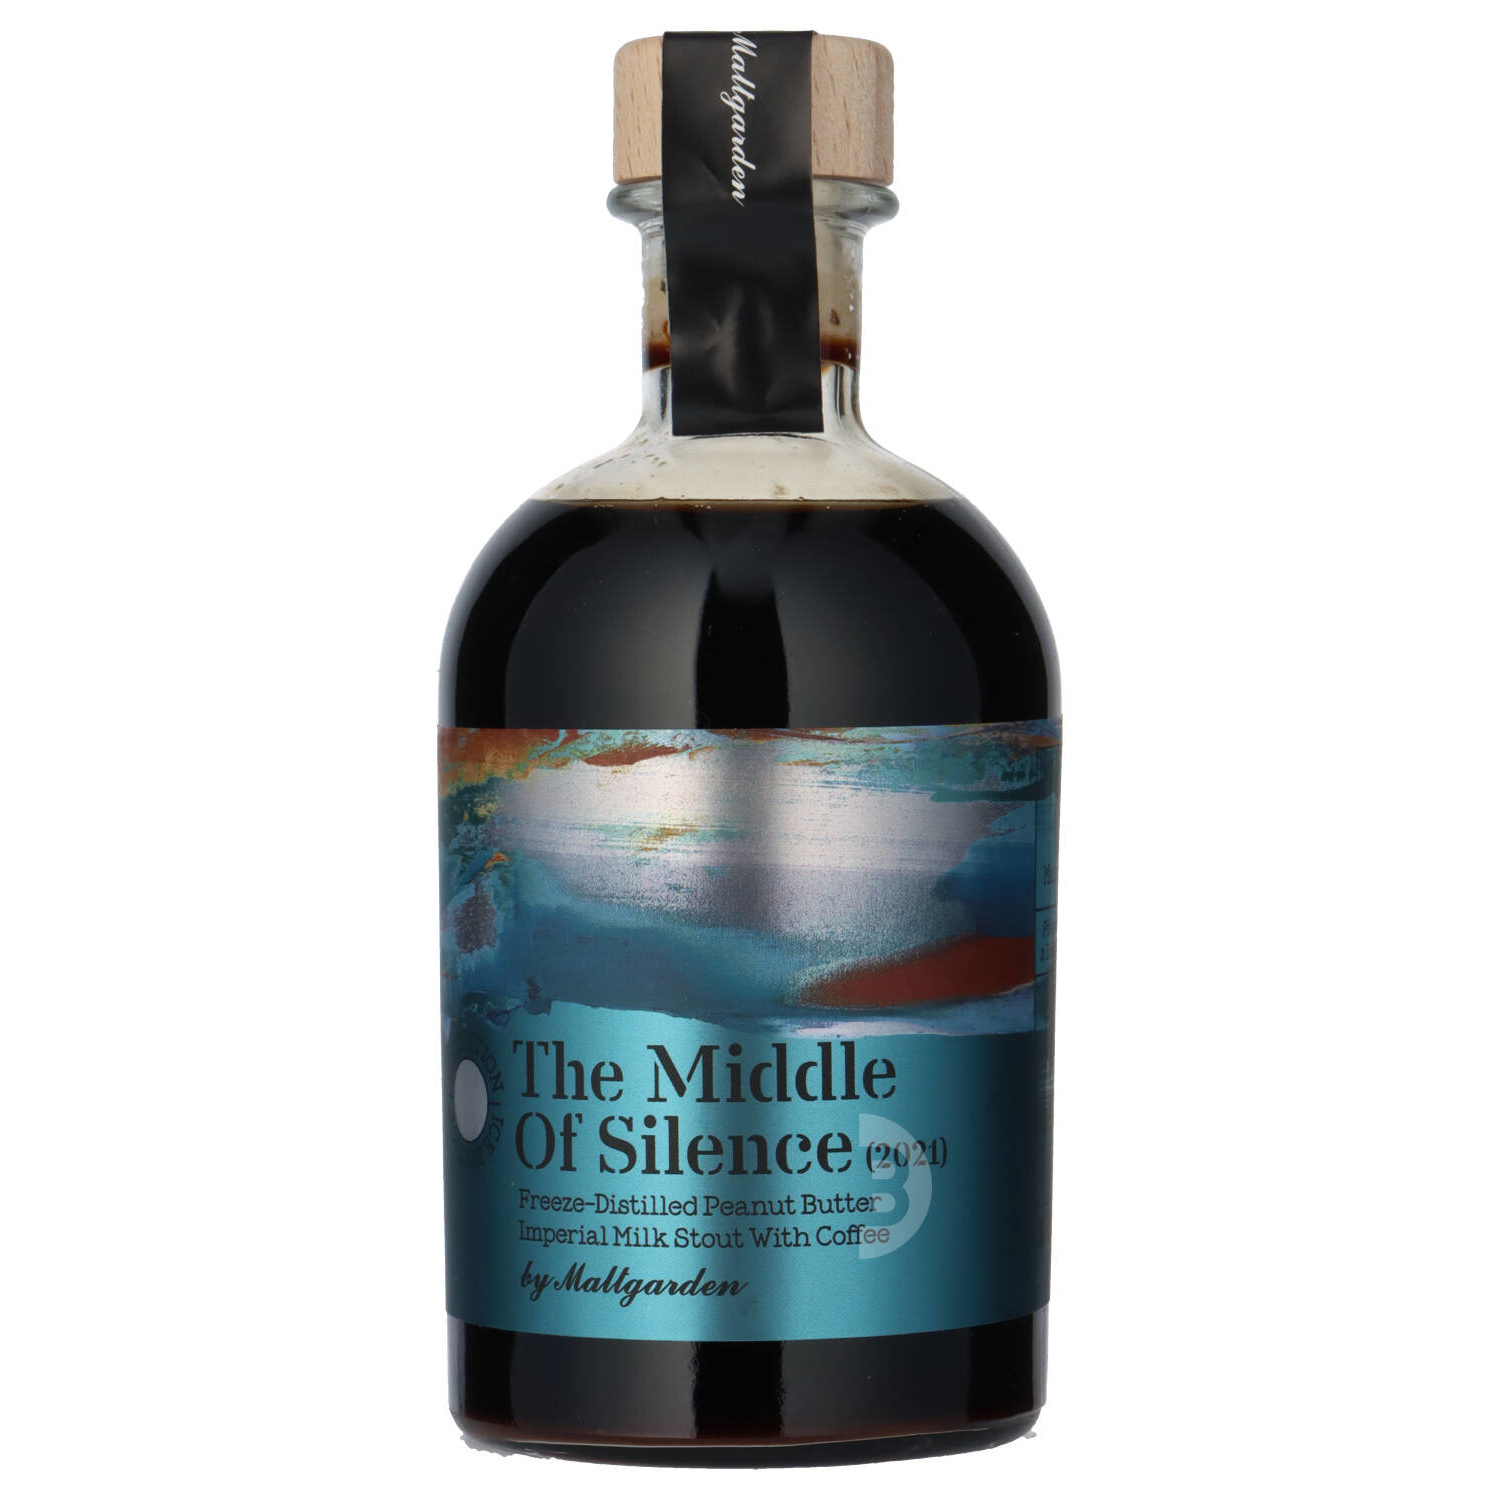 Maltgarden The Middle of Silence 2022 – Freeze-Destilled Peanut Buttter Imperial Milk Stout with Coffee